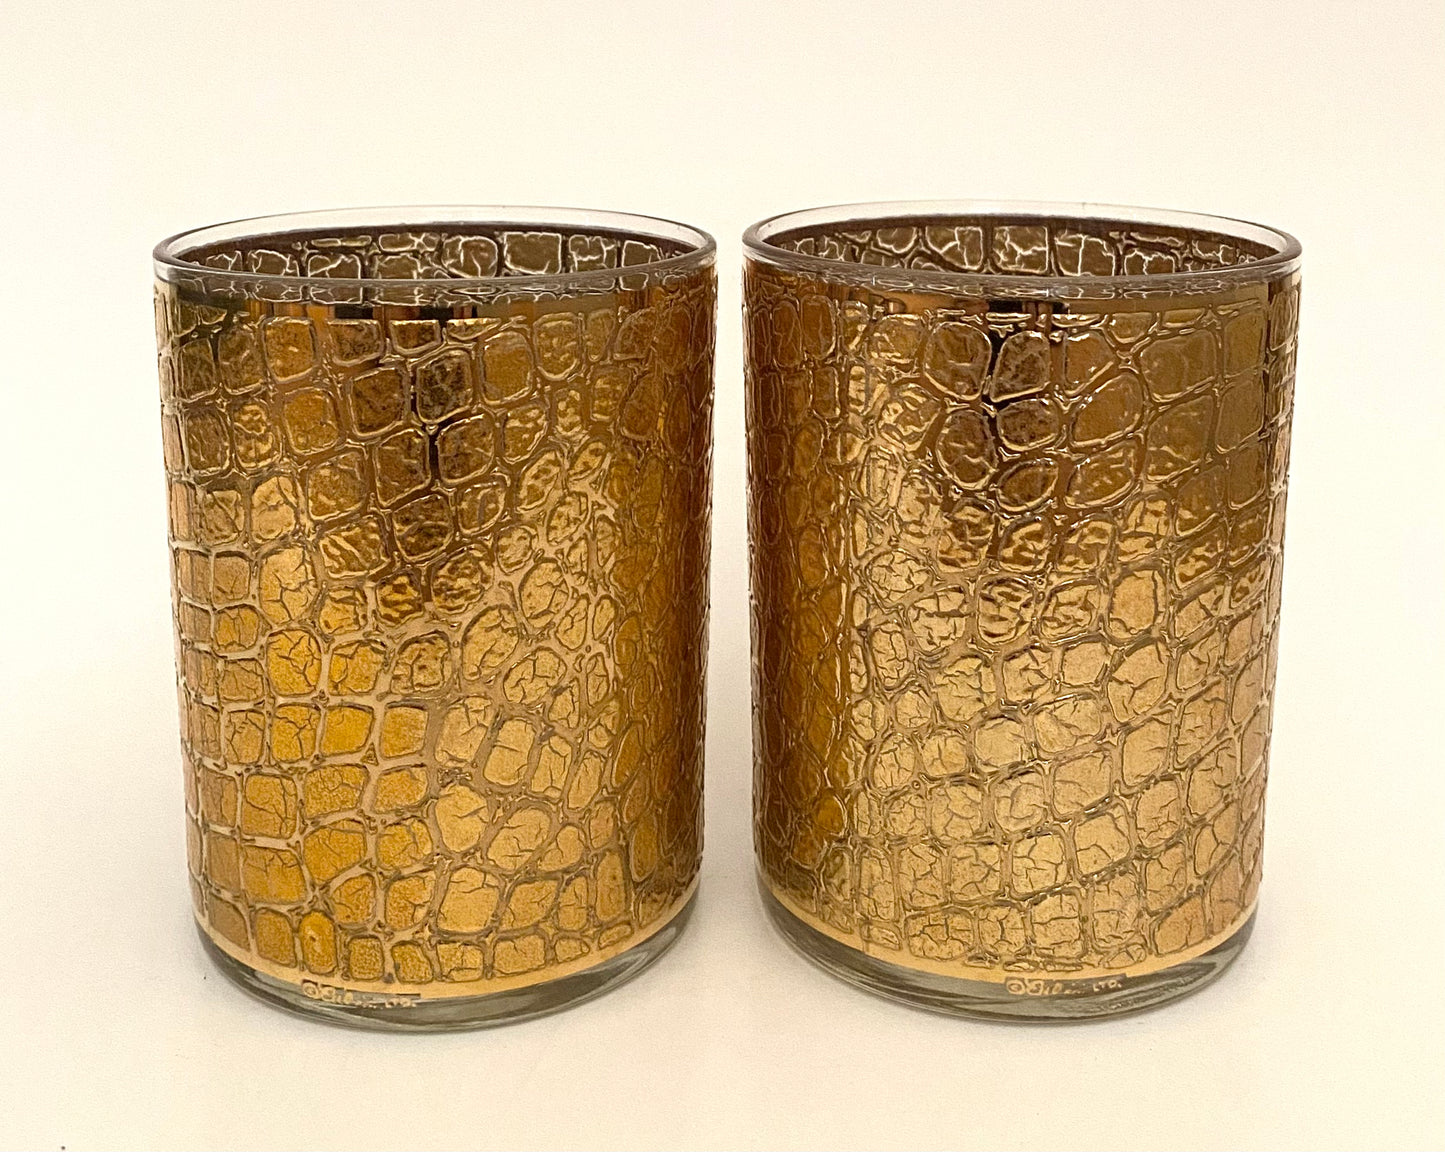 Culver Alligator Executive On The Rocks (Pair) 2 Available